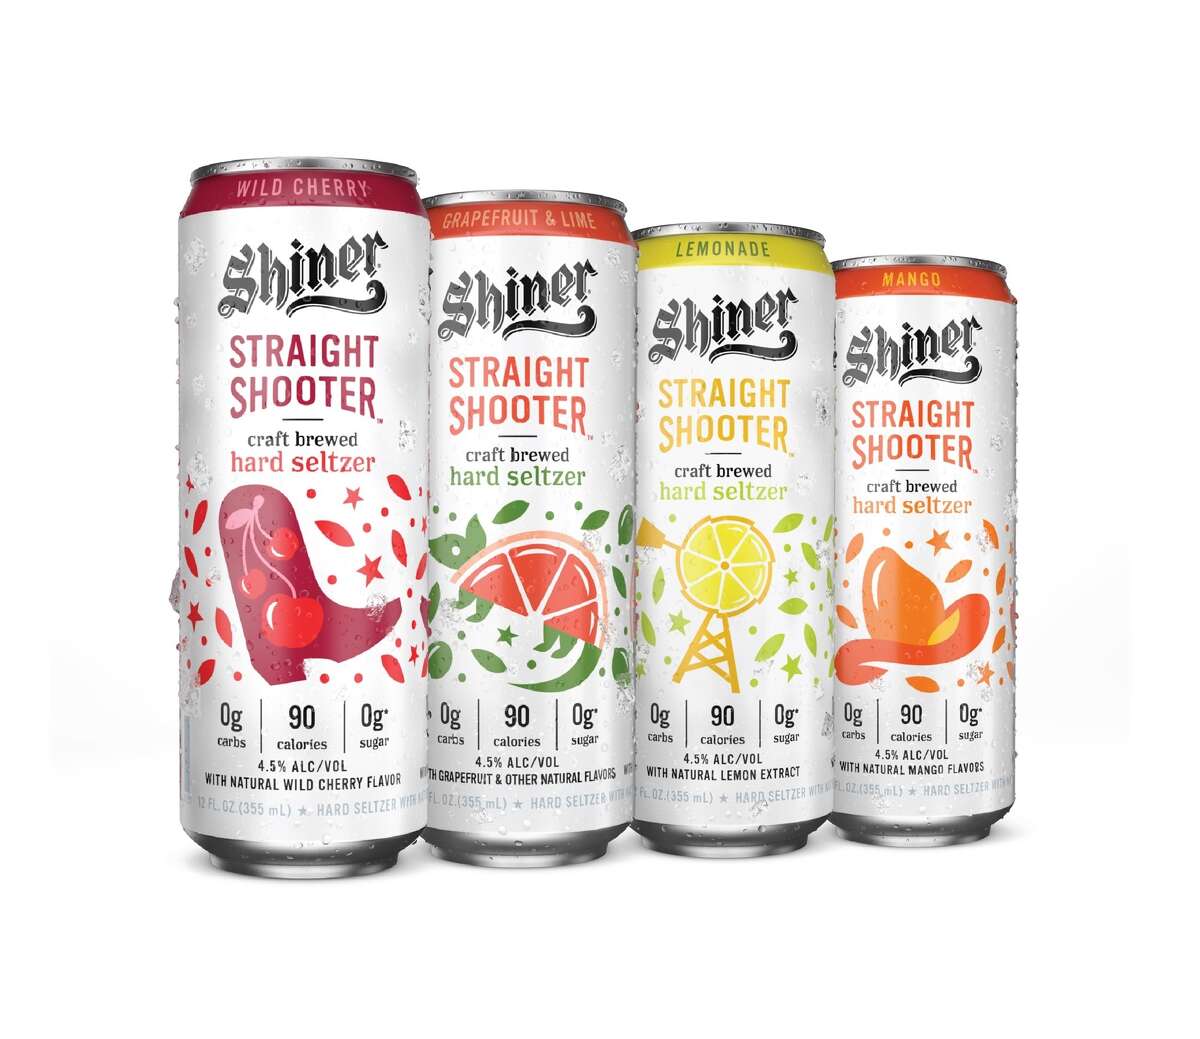 Shiner Beer is about to release a new 90calorie hard seltzer drink